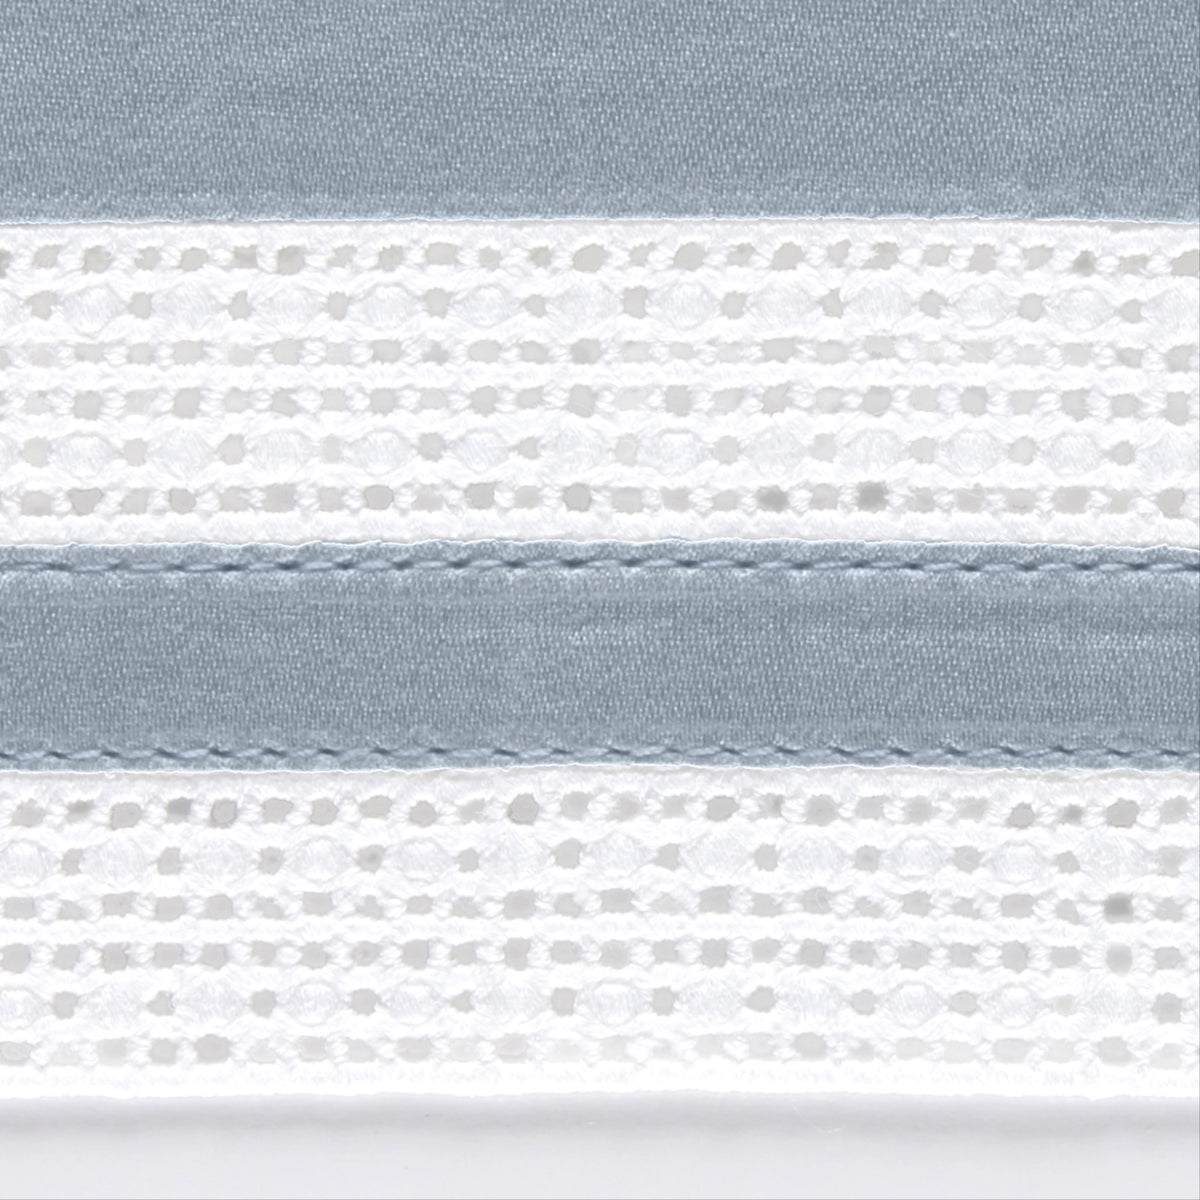 Swatch Sample of Matouk Grace Bedding in Color Hazy Blue